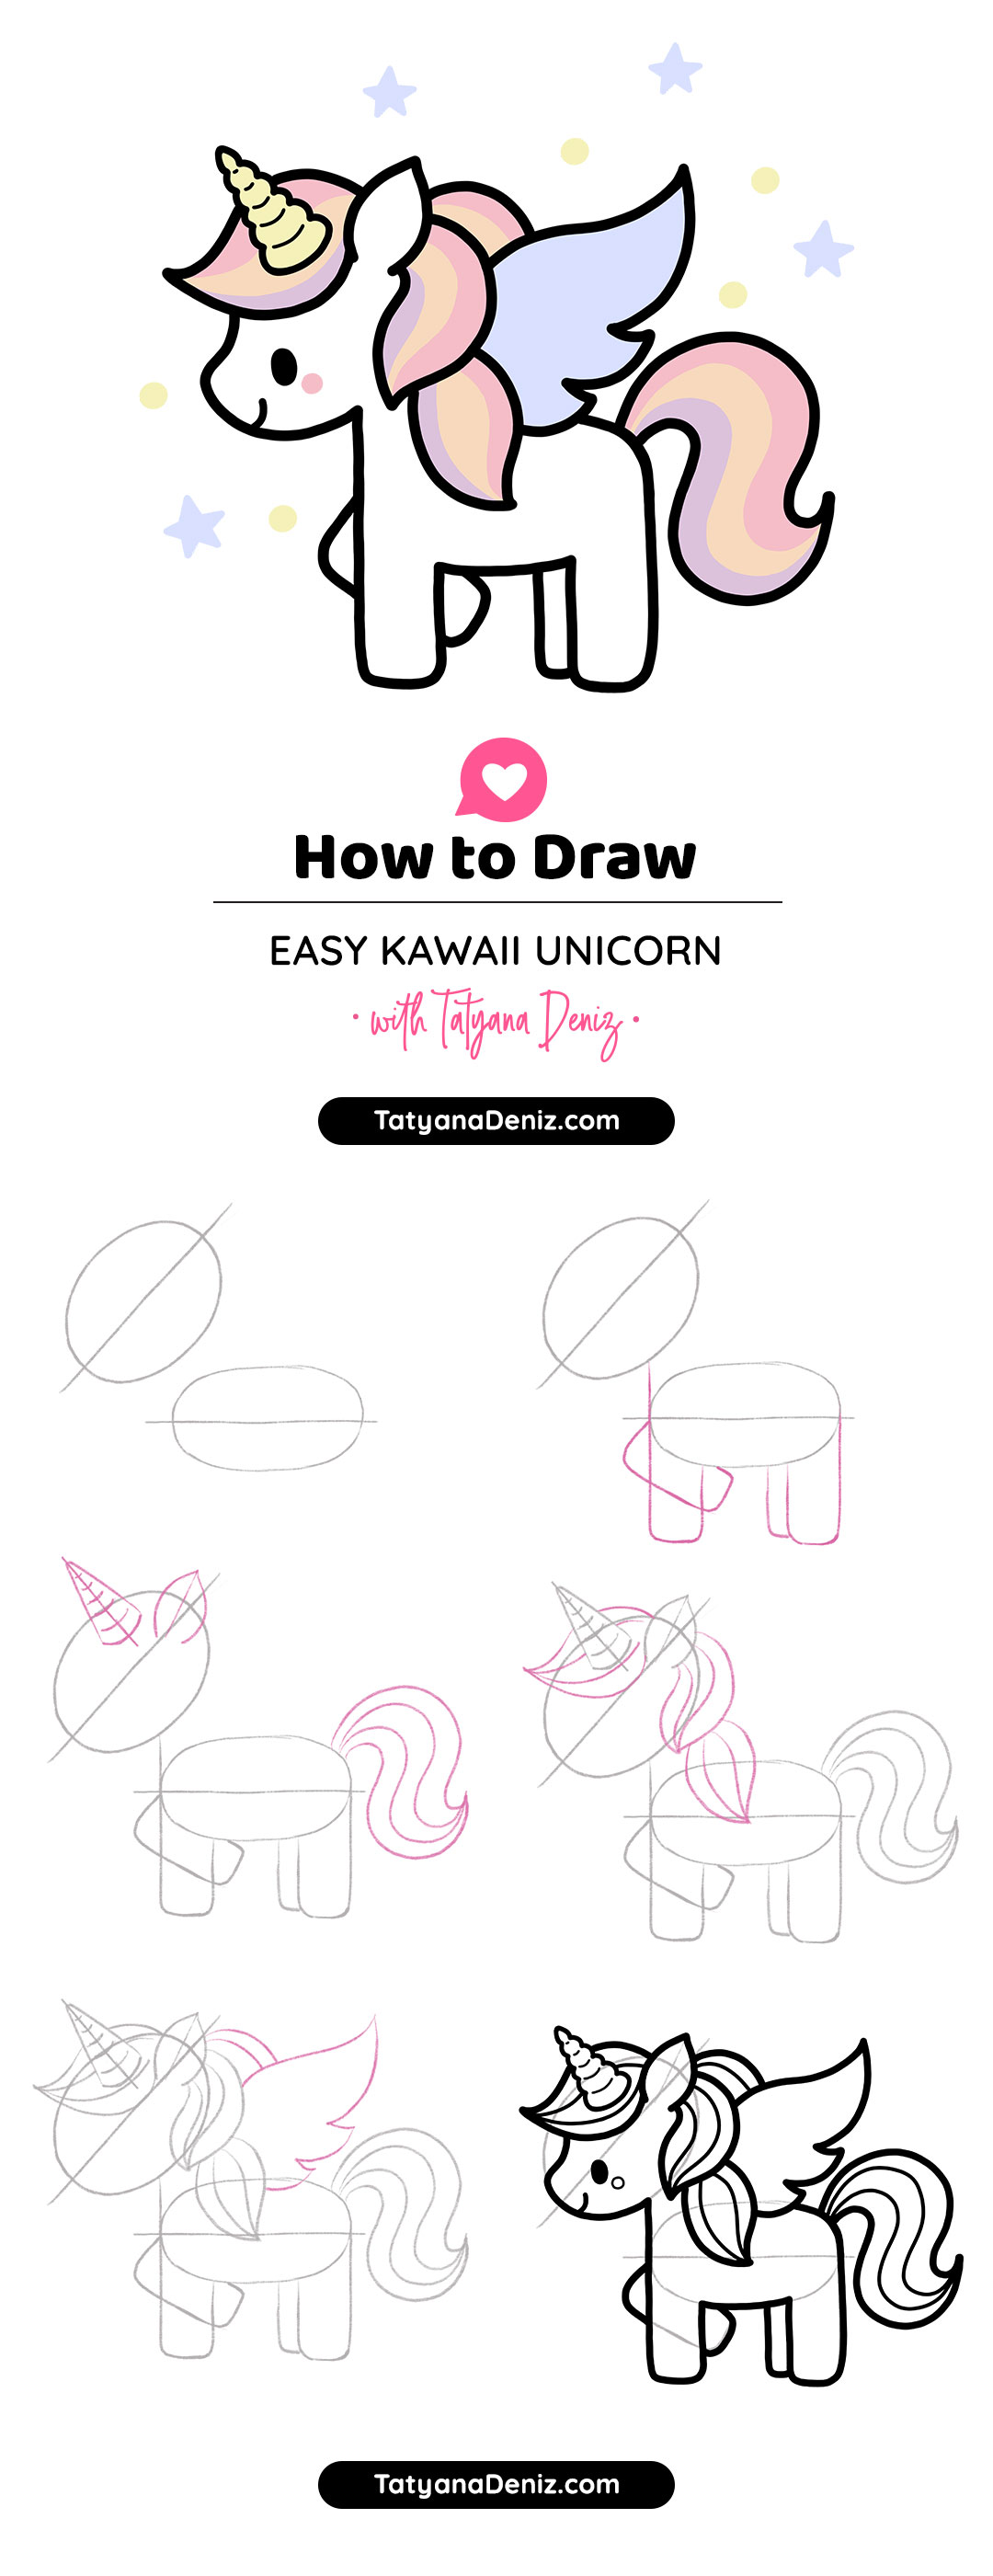 How To Draw Cute And Easy Kawaii Unicorn Step By Step Wow it is so amazing, i challenged myself to draw without the eraser it was kind of hard but i attempted it. easy kawaii unicorn step by step